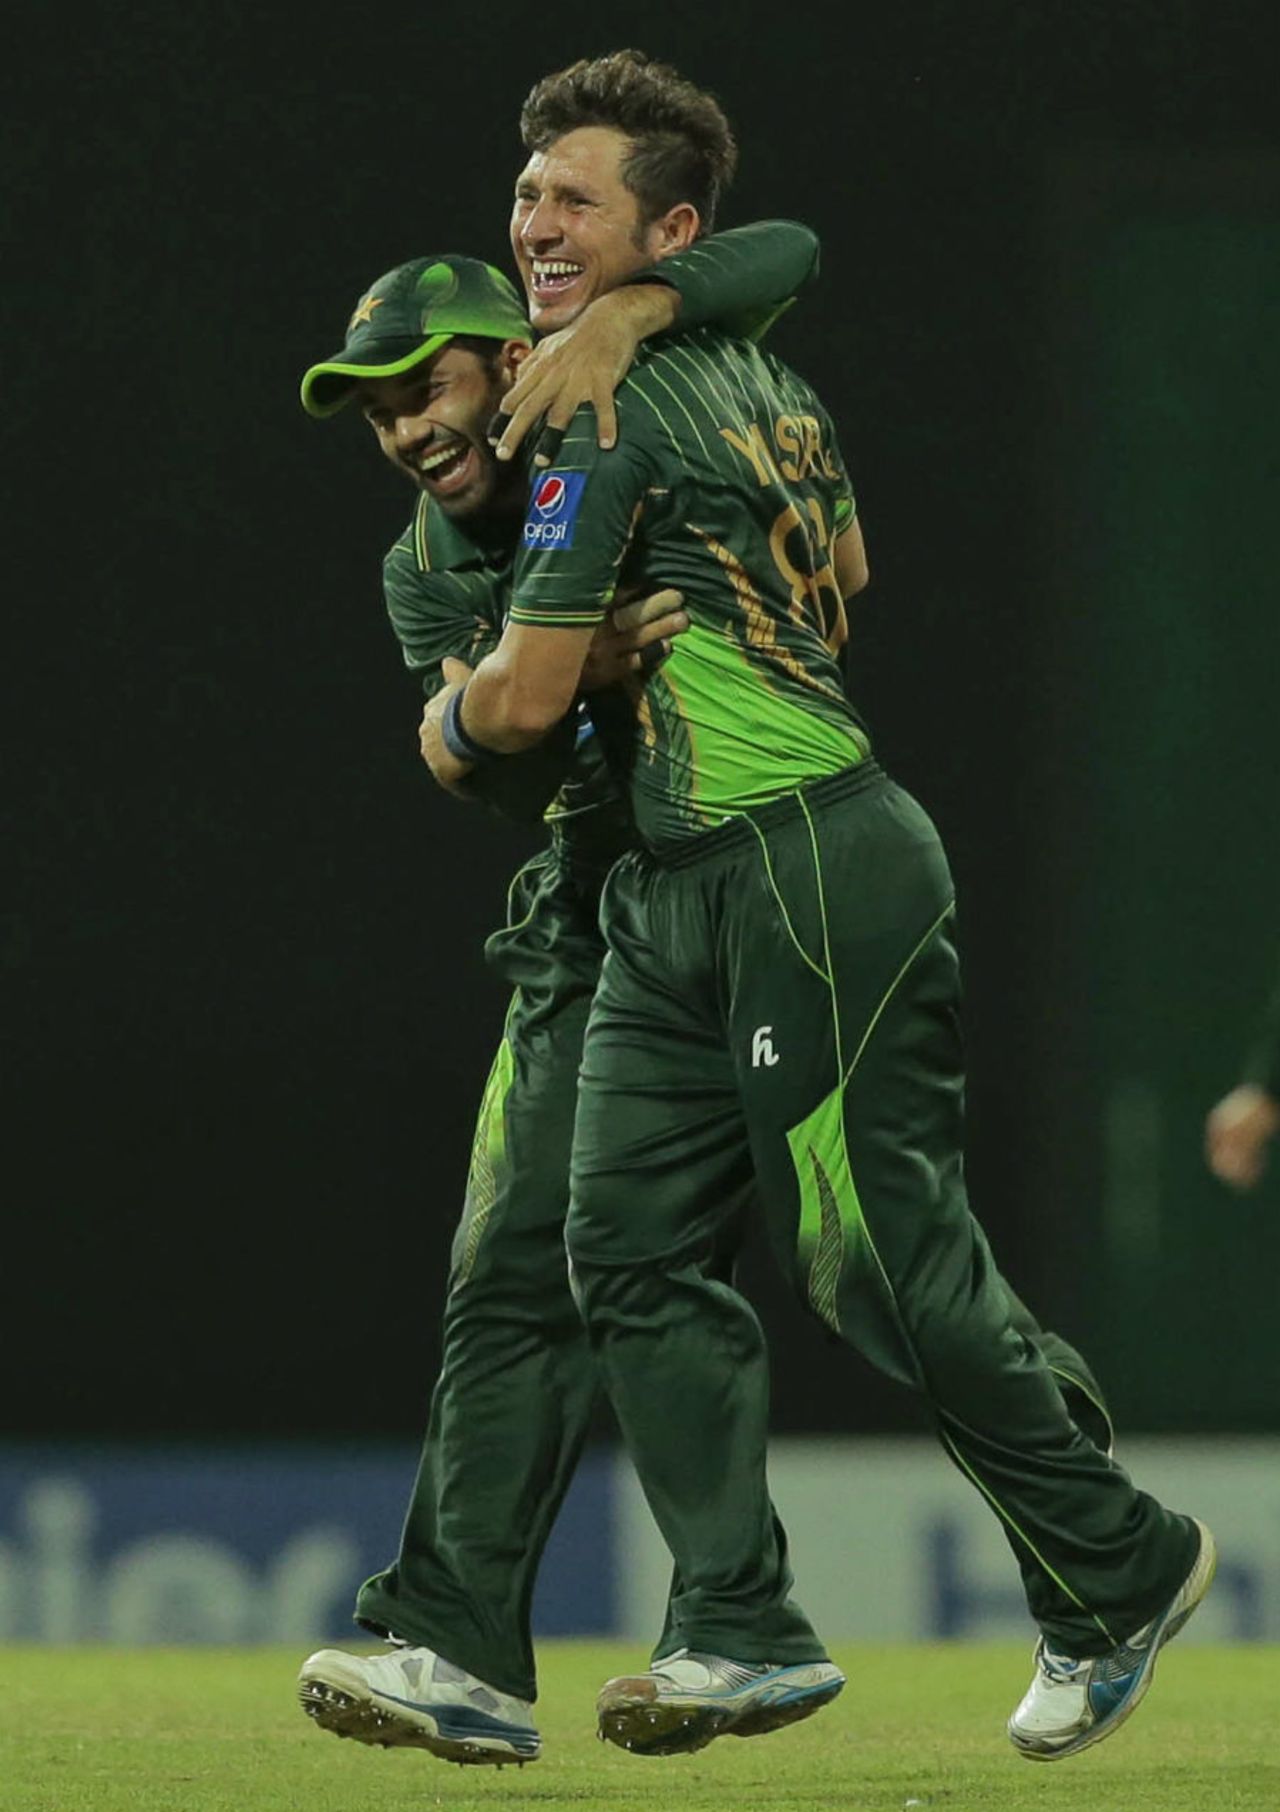 Yasir Shah picked up 4 for 29 in his 10 overs, Sri Lanka v Pakistan, 3rd ODI, Colombo, July 19, 2015